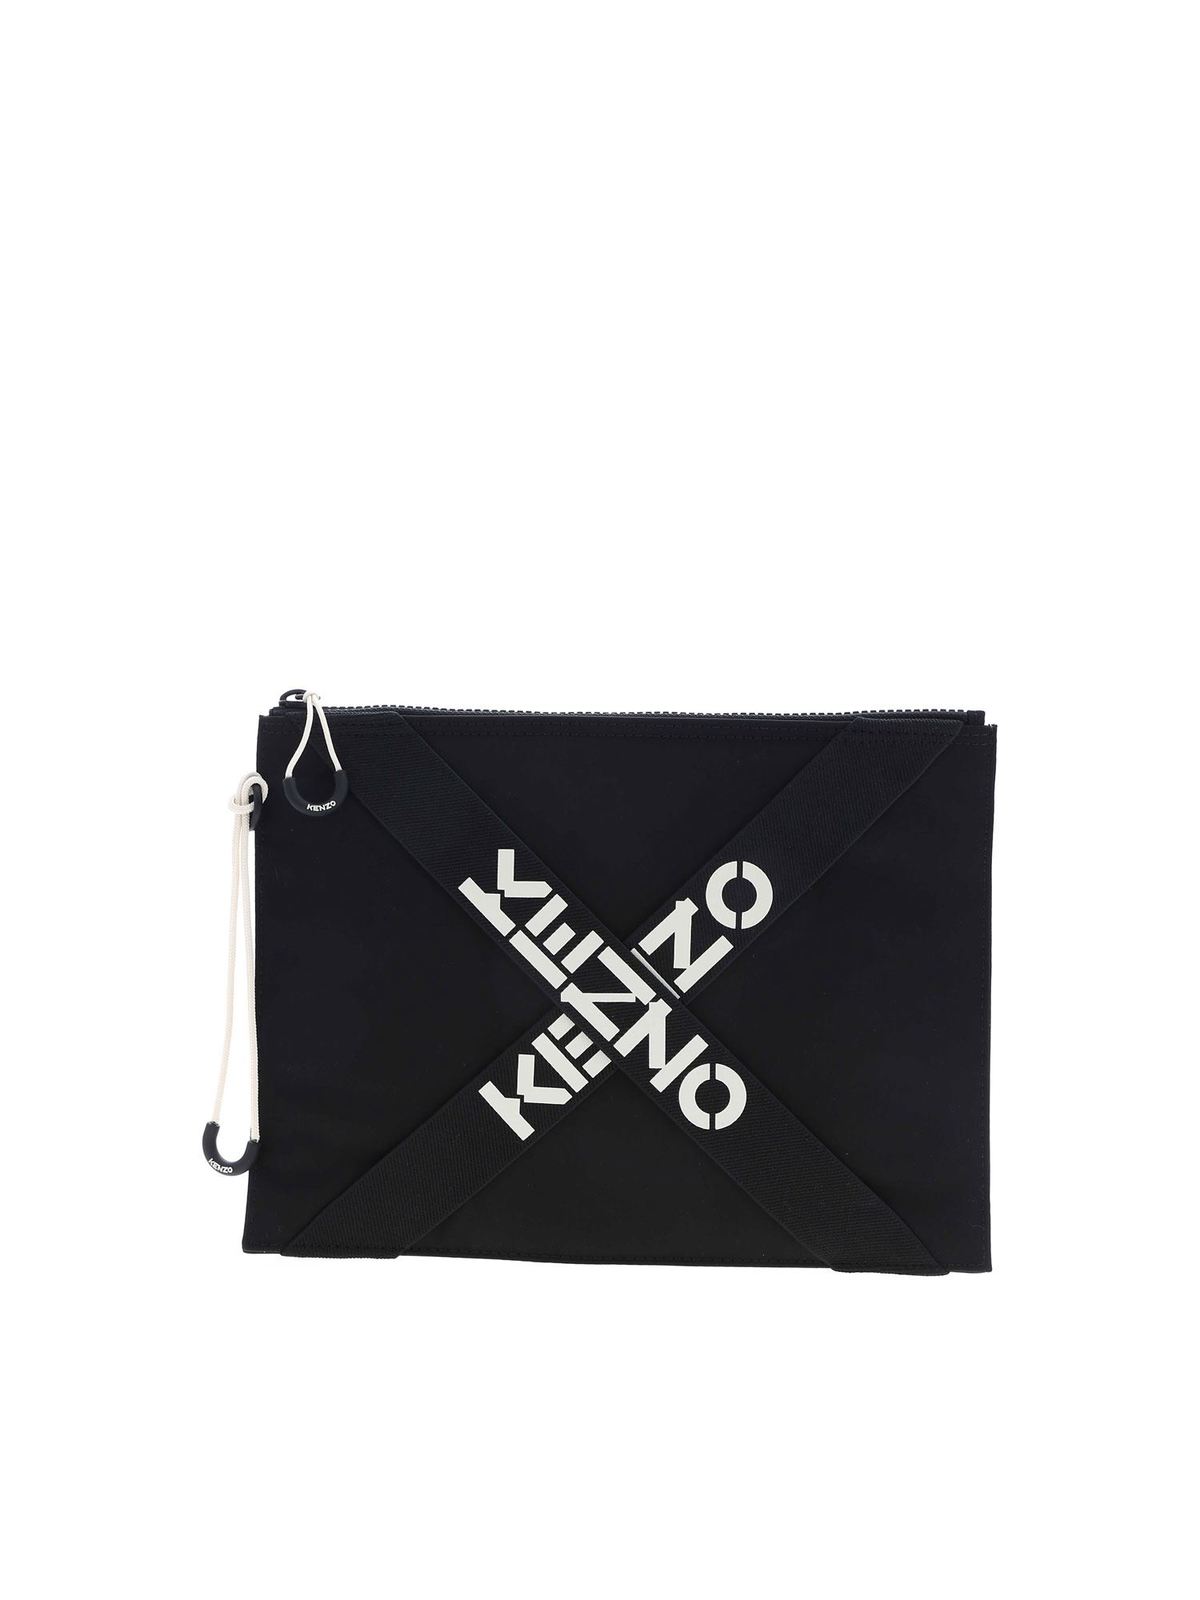 Clutches Kenzo - Branded bands clutch bag in black - 5PM222F2199